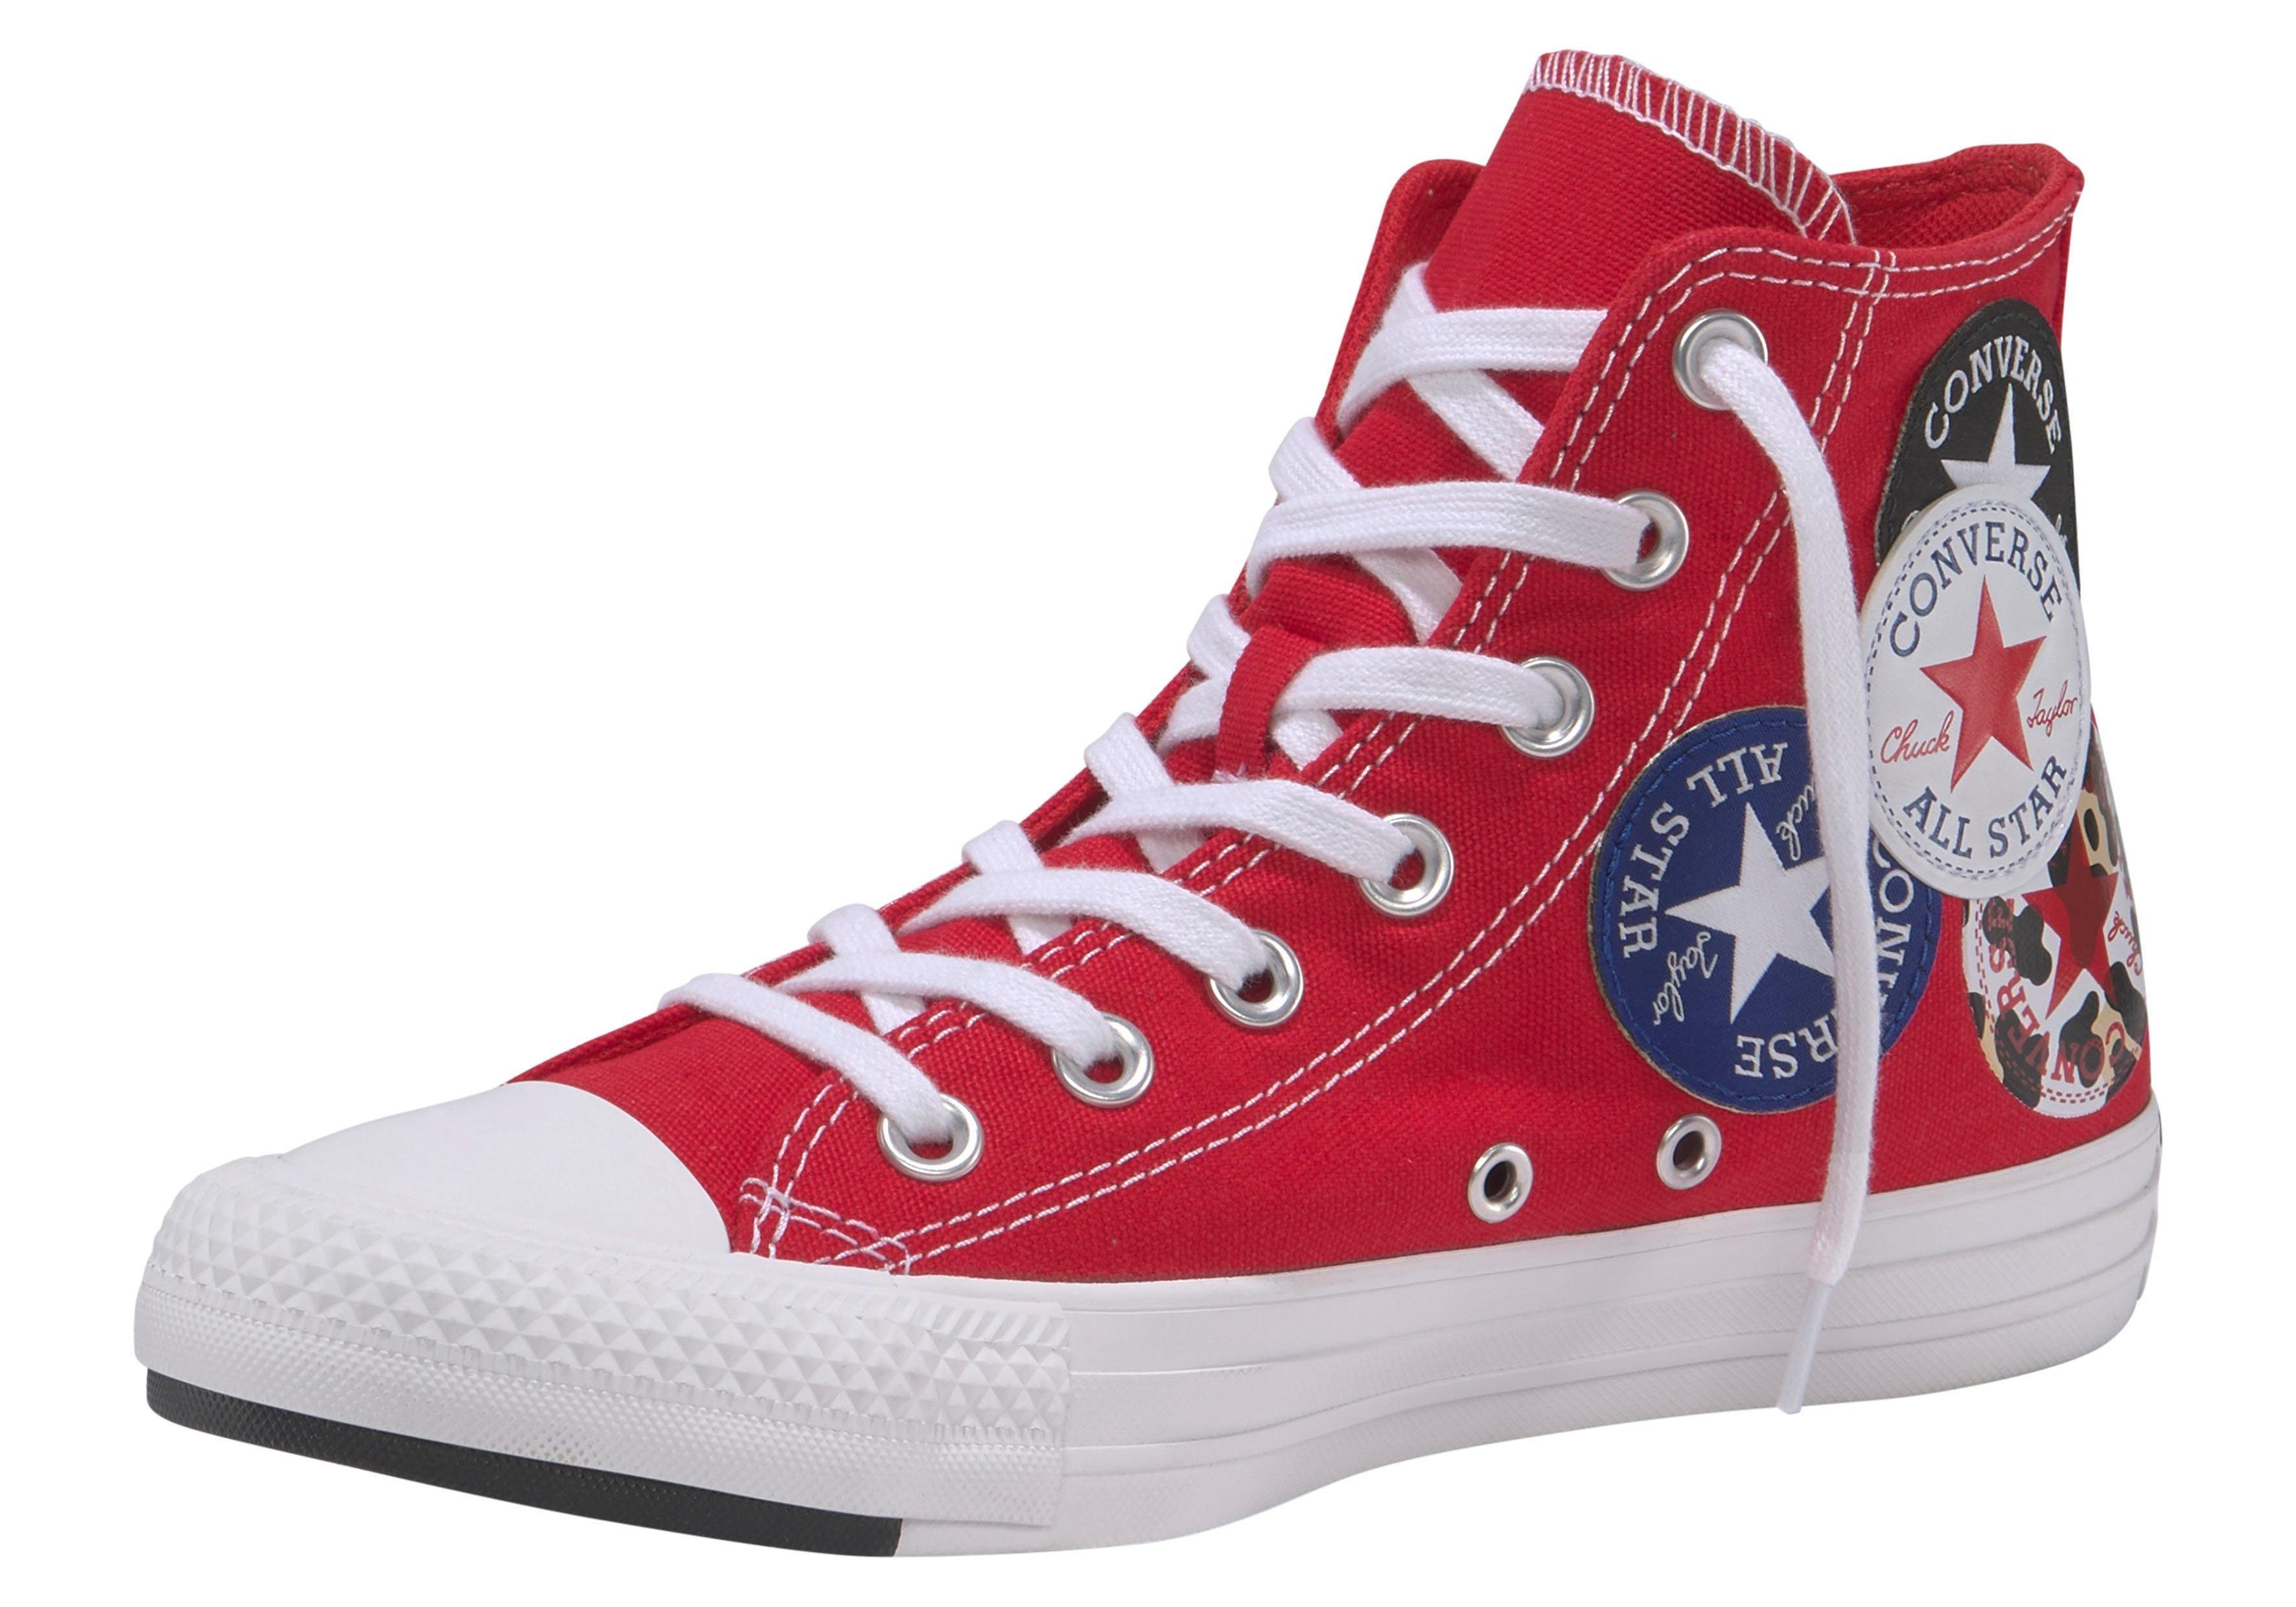 converse all star rot